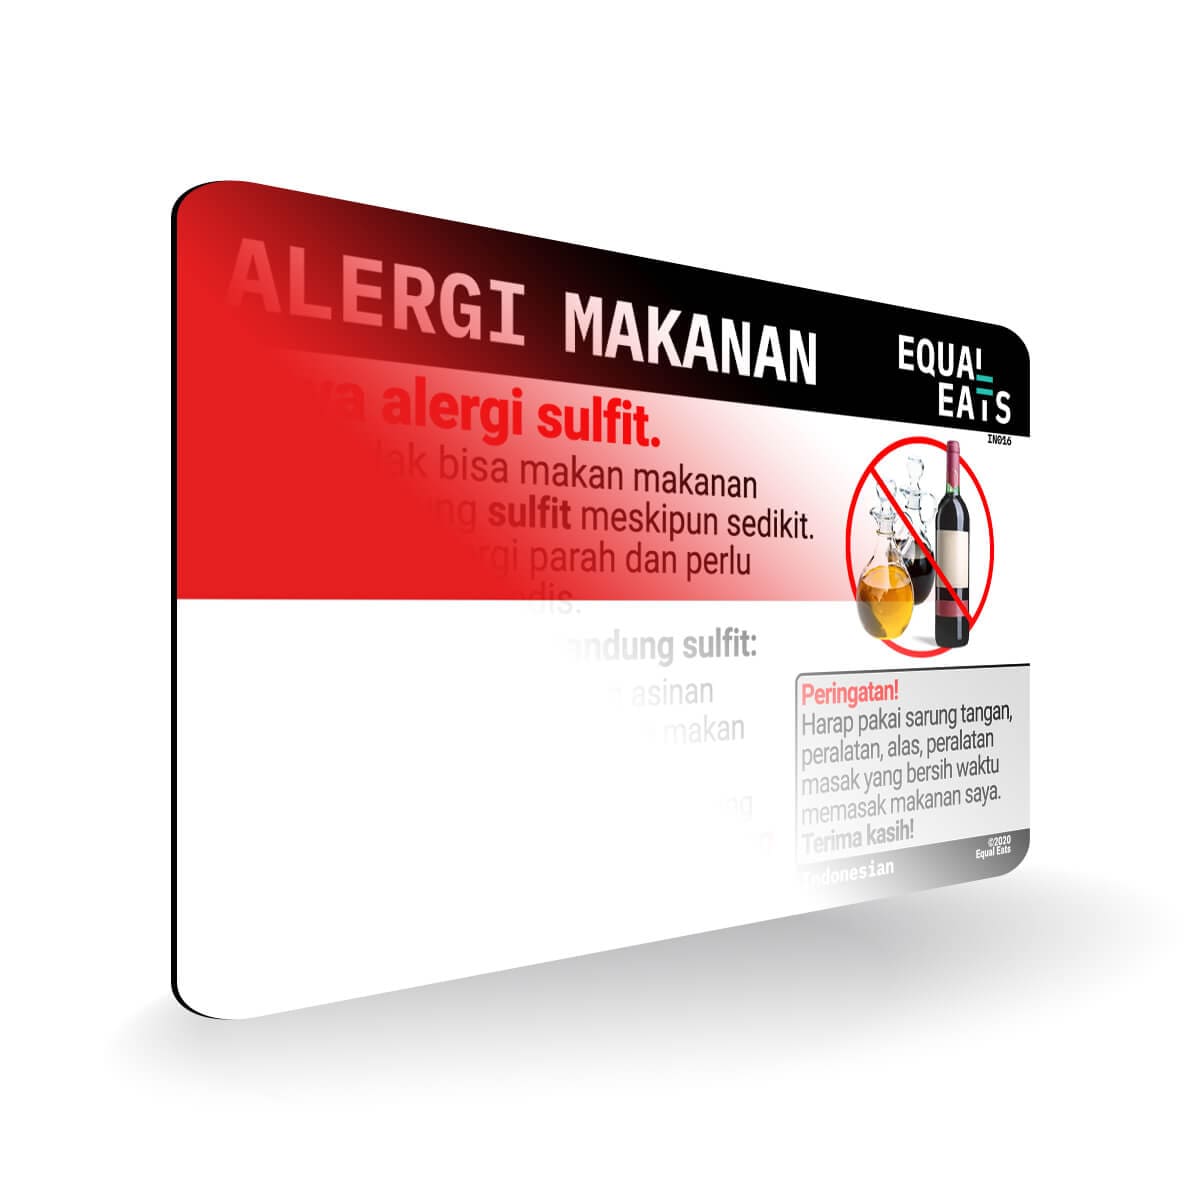 Sulfite Allergy in Indonesian. Sulfite Allergy Card for Indonesia